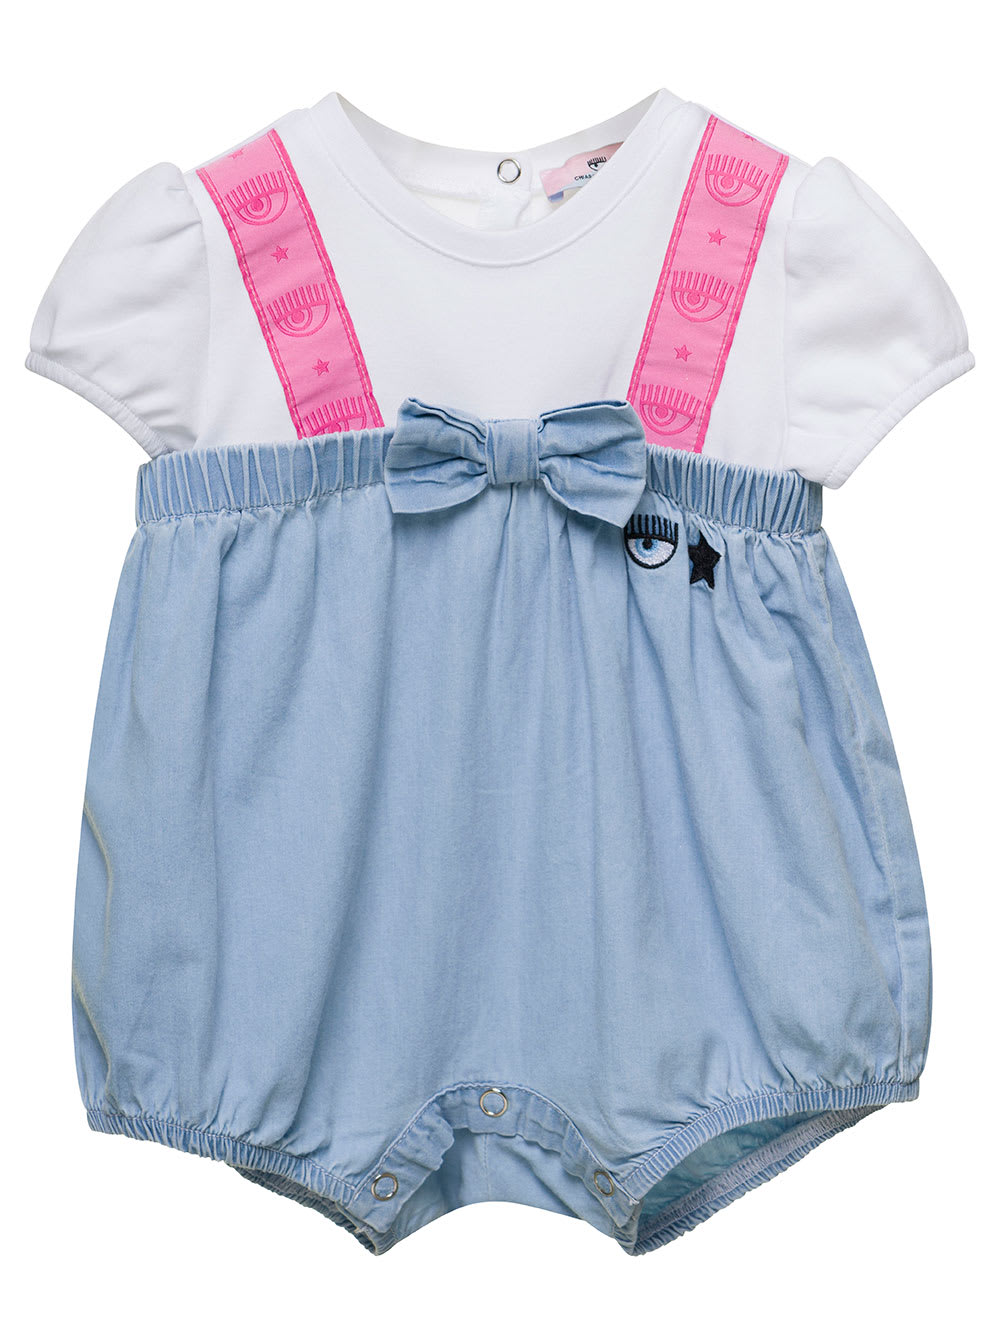 CHIARA FERRAGNI MULTICOLOR DUNGAREES ROMPER SUIT WITH LOGO AND BOW DETAIL IN COTTON BABY